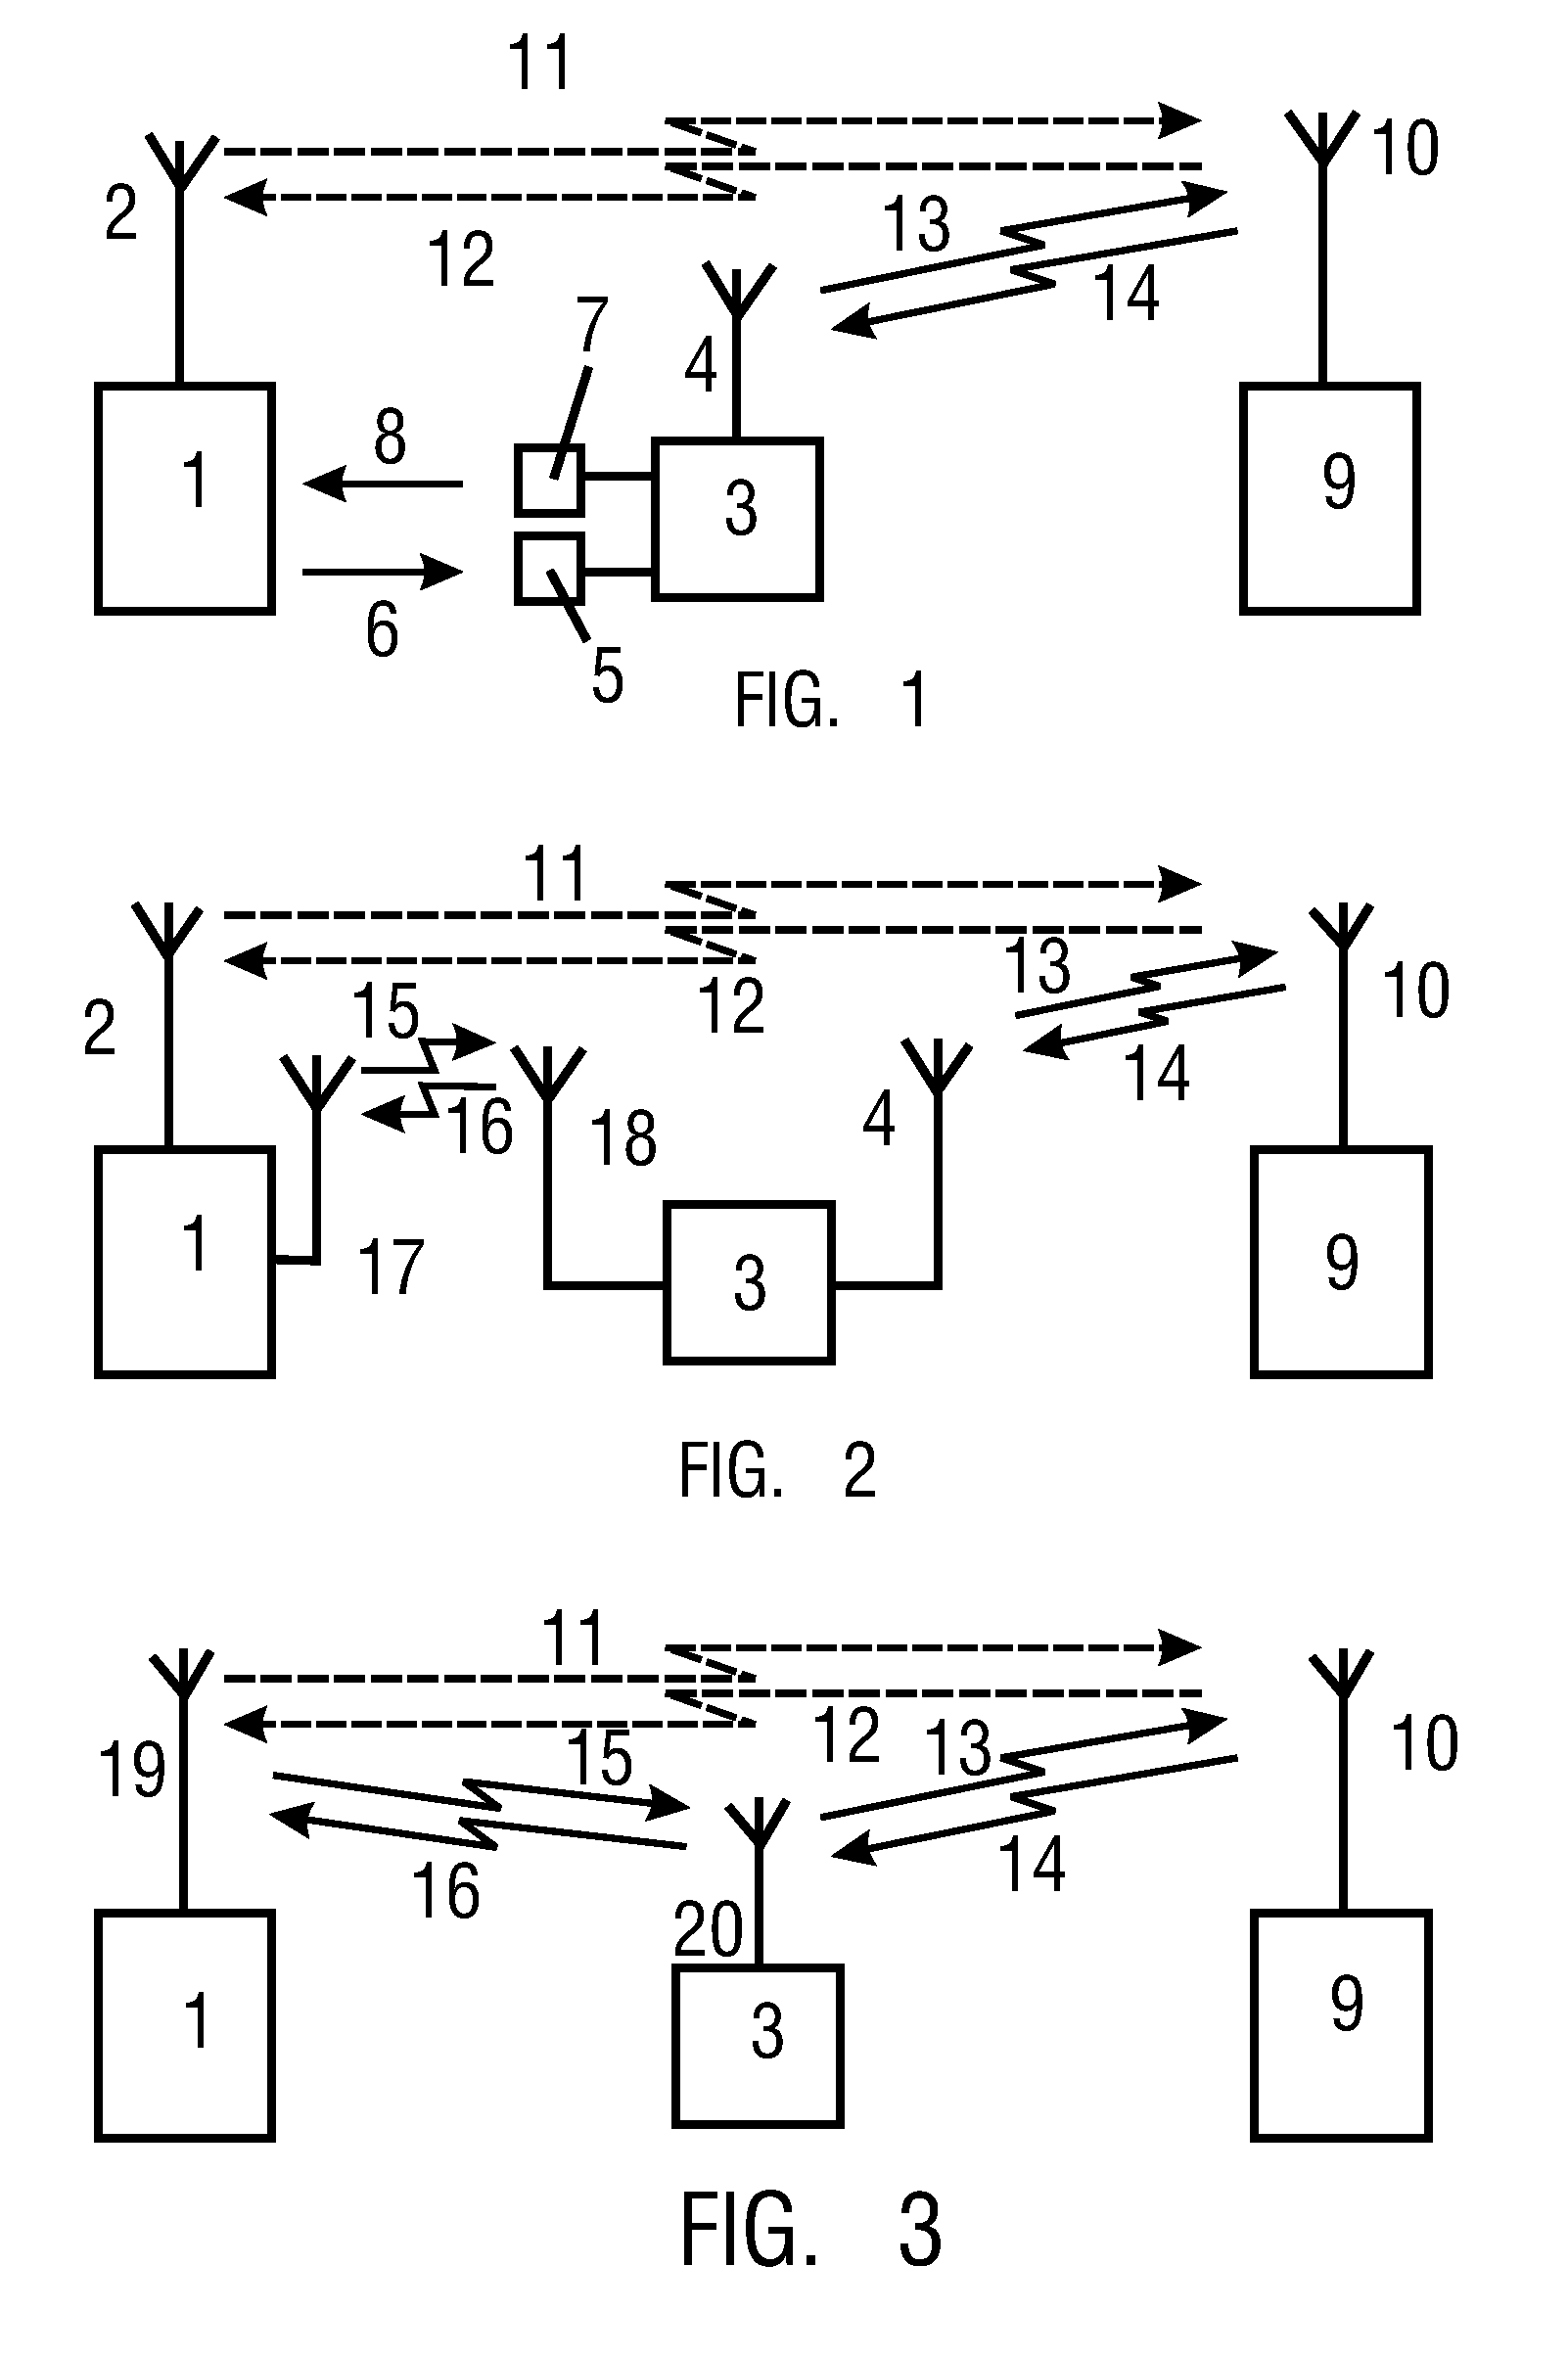 Method of transmitting a message in a mobile communications system using a mobile repeater